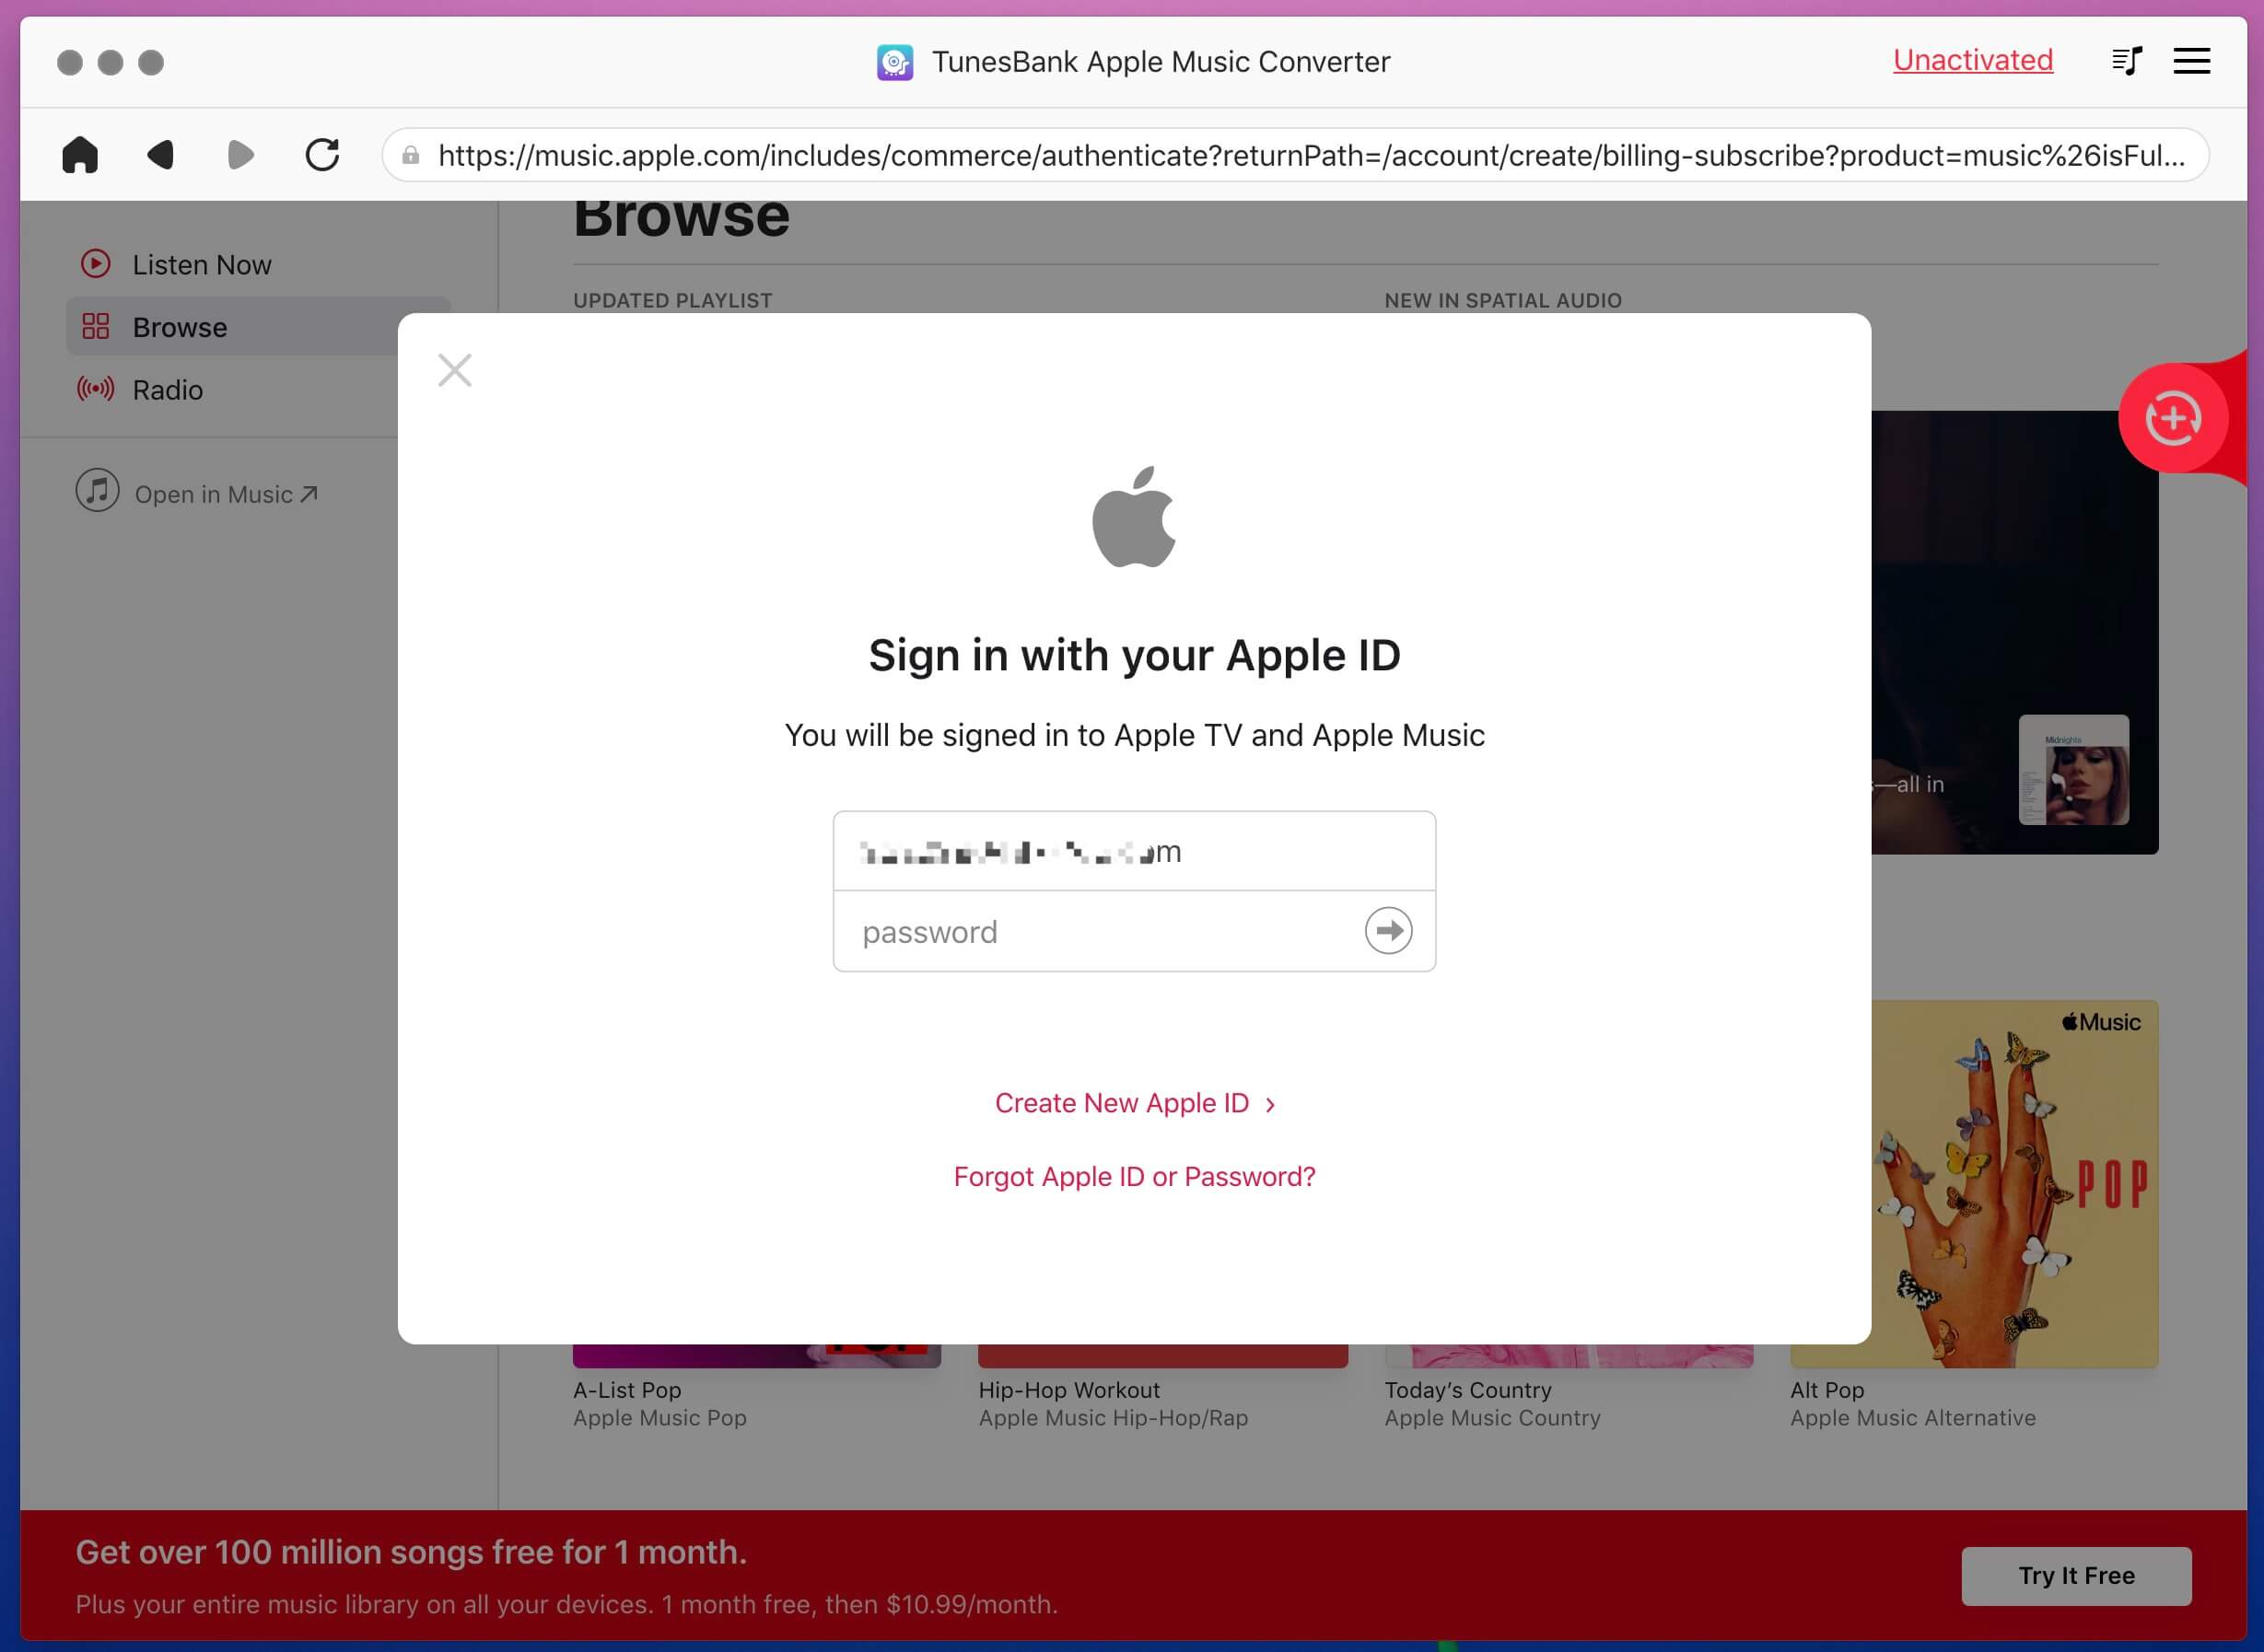 launch the converter and sign in Apple ID